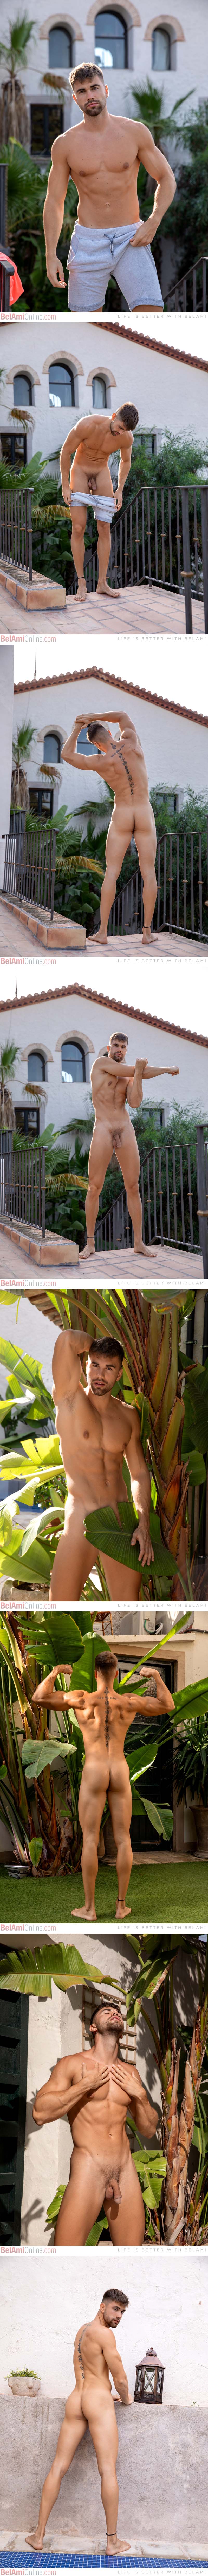 Bobby Kanne [Model of the Week Pin-up] at BelAmiOnline